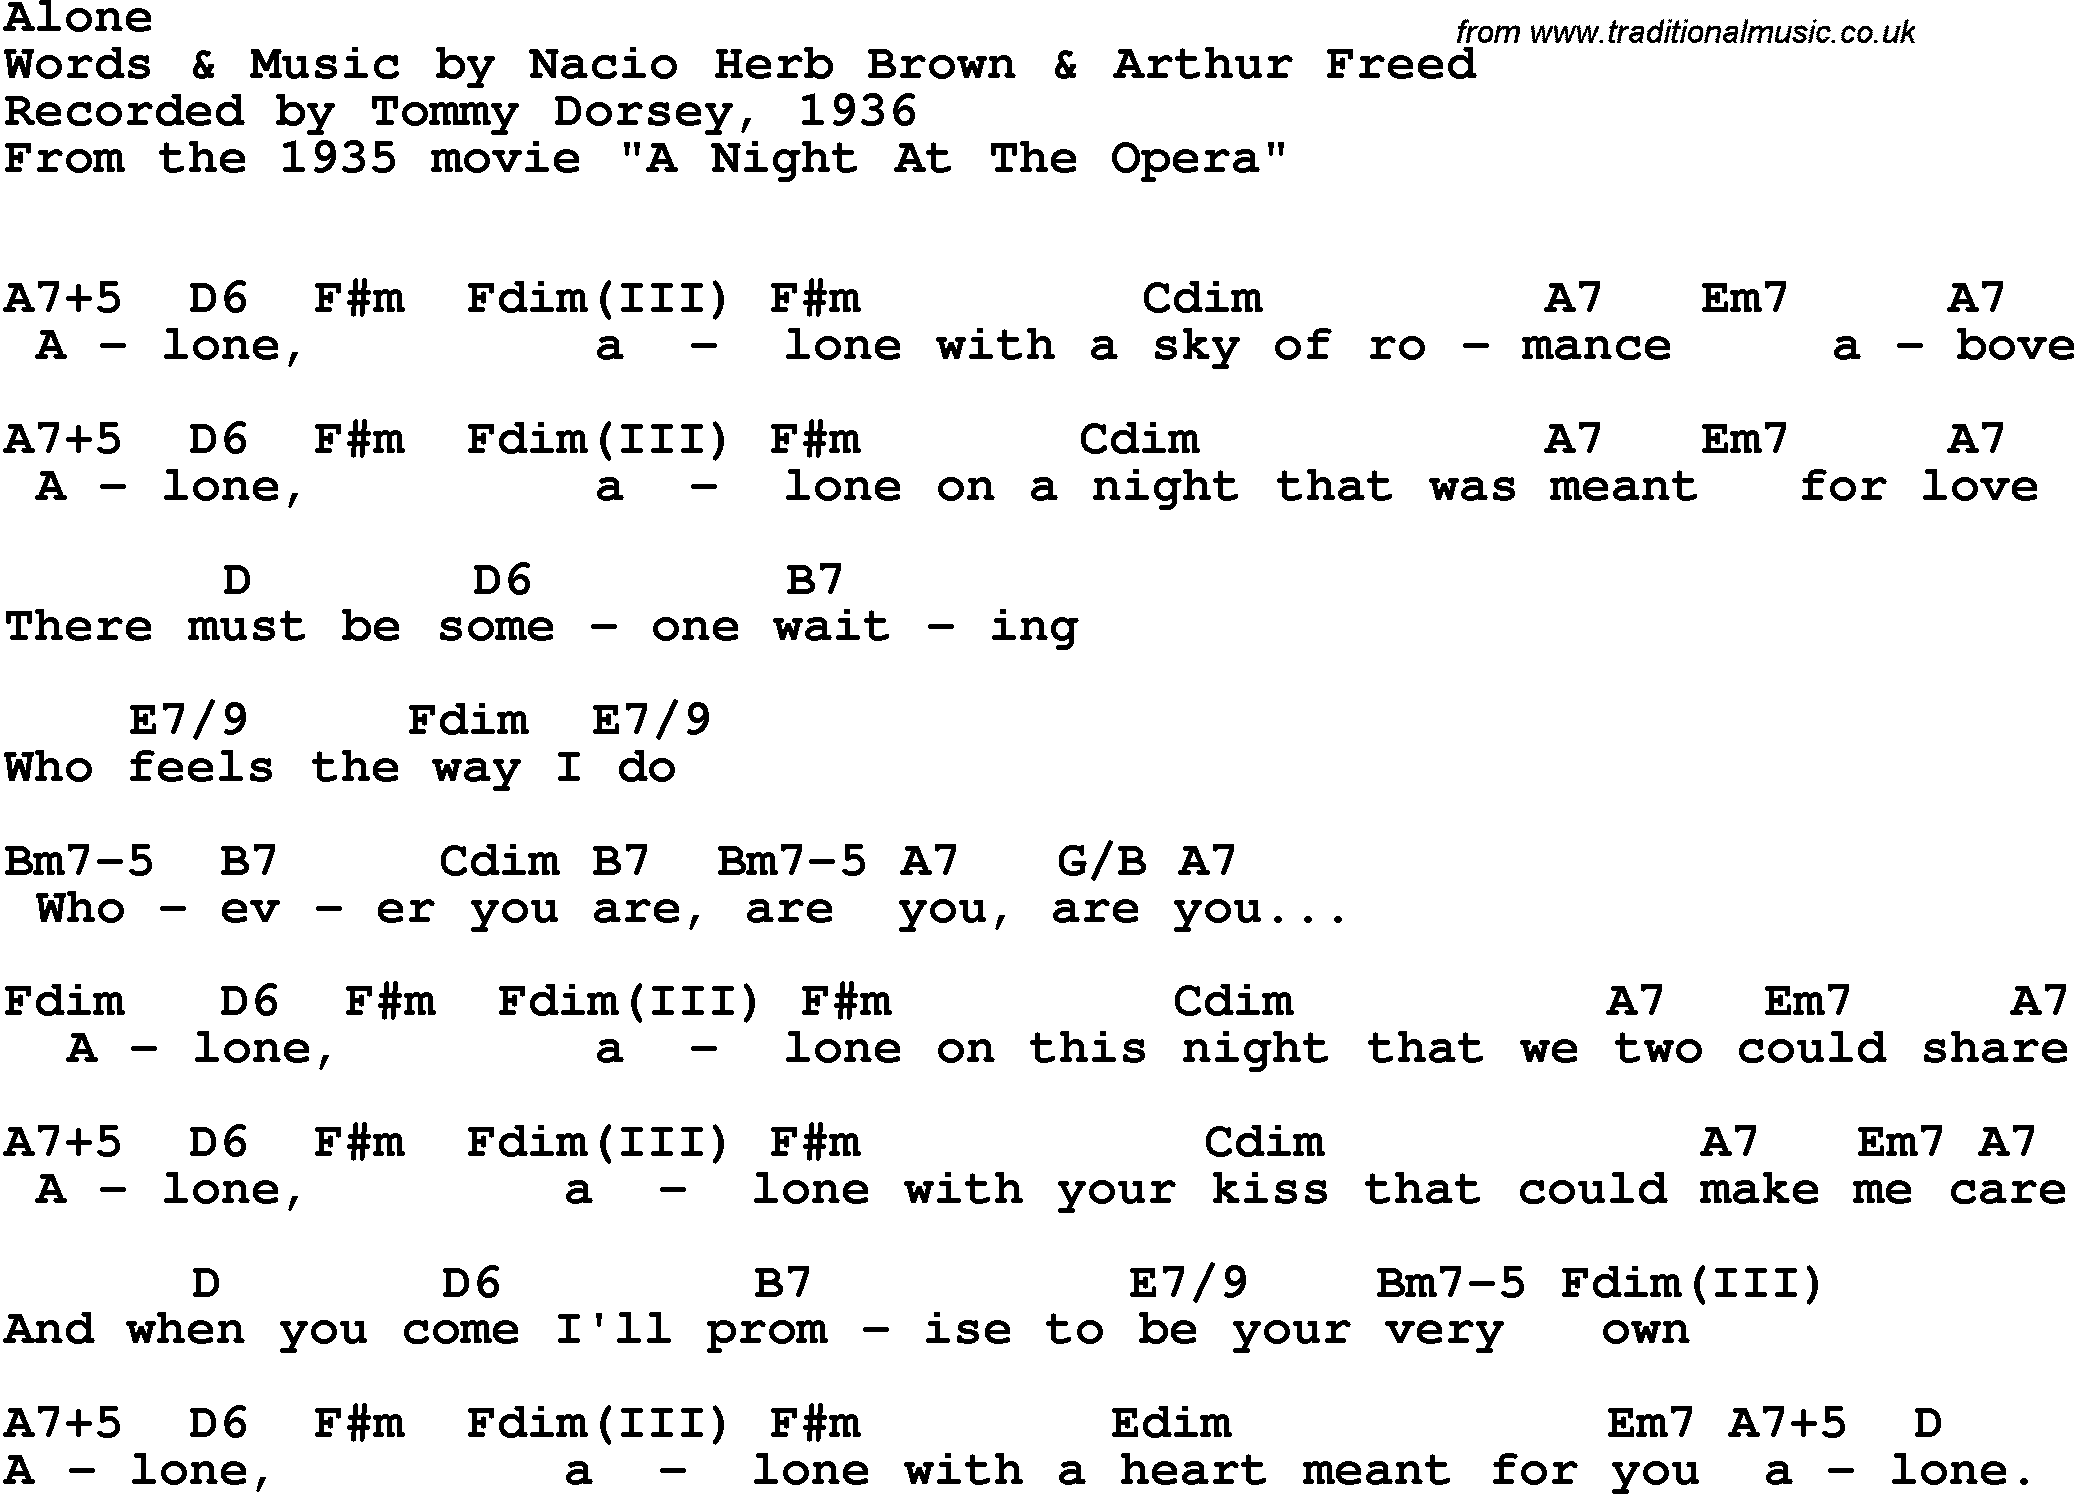 Song Lyrics with guitar chords for Alone - Tommy Dorsey, 1936